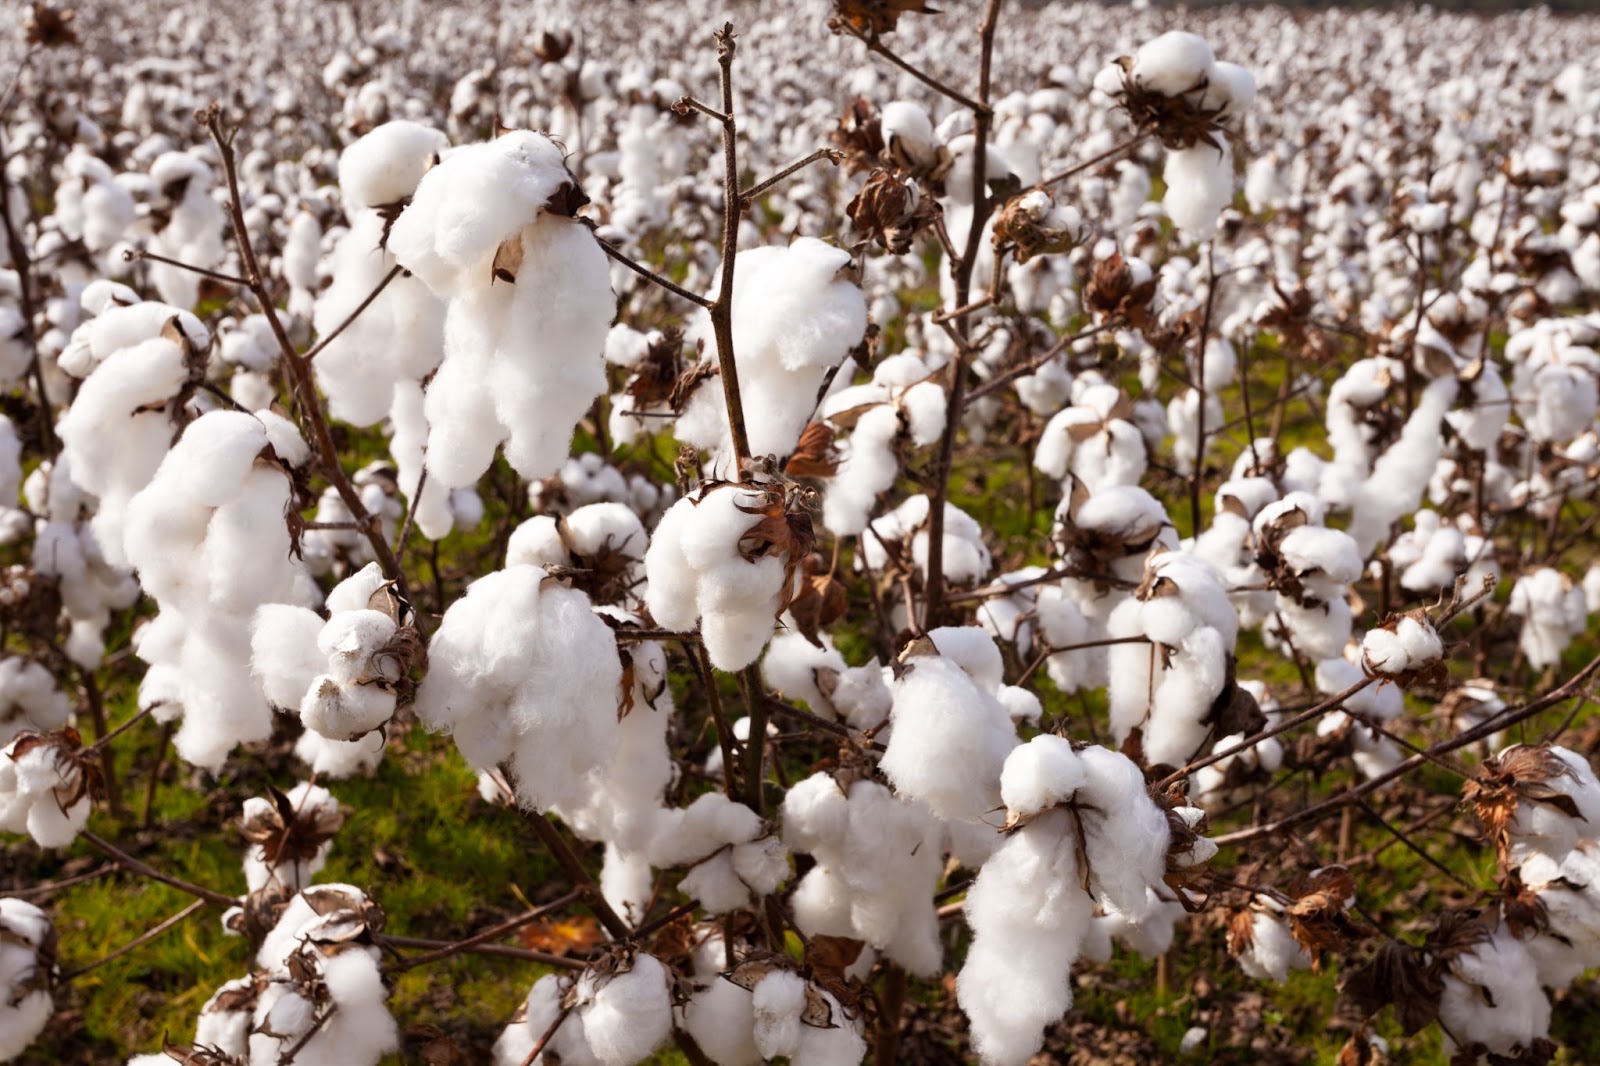 organic cotton cultivation in field